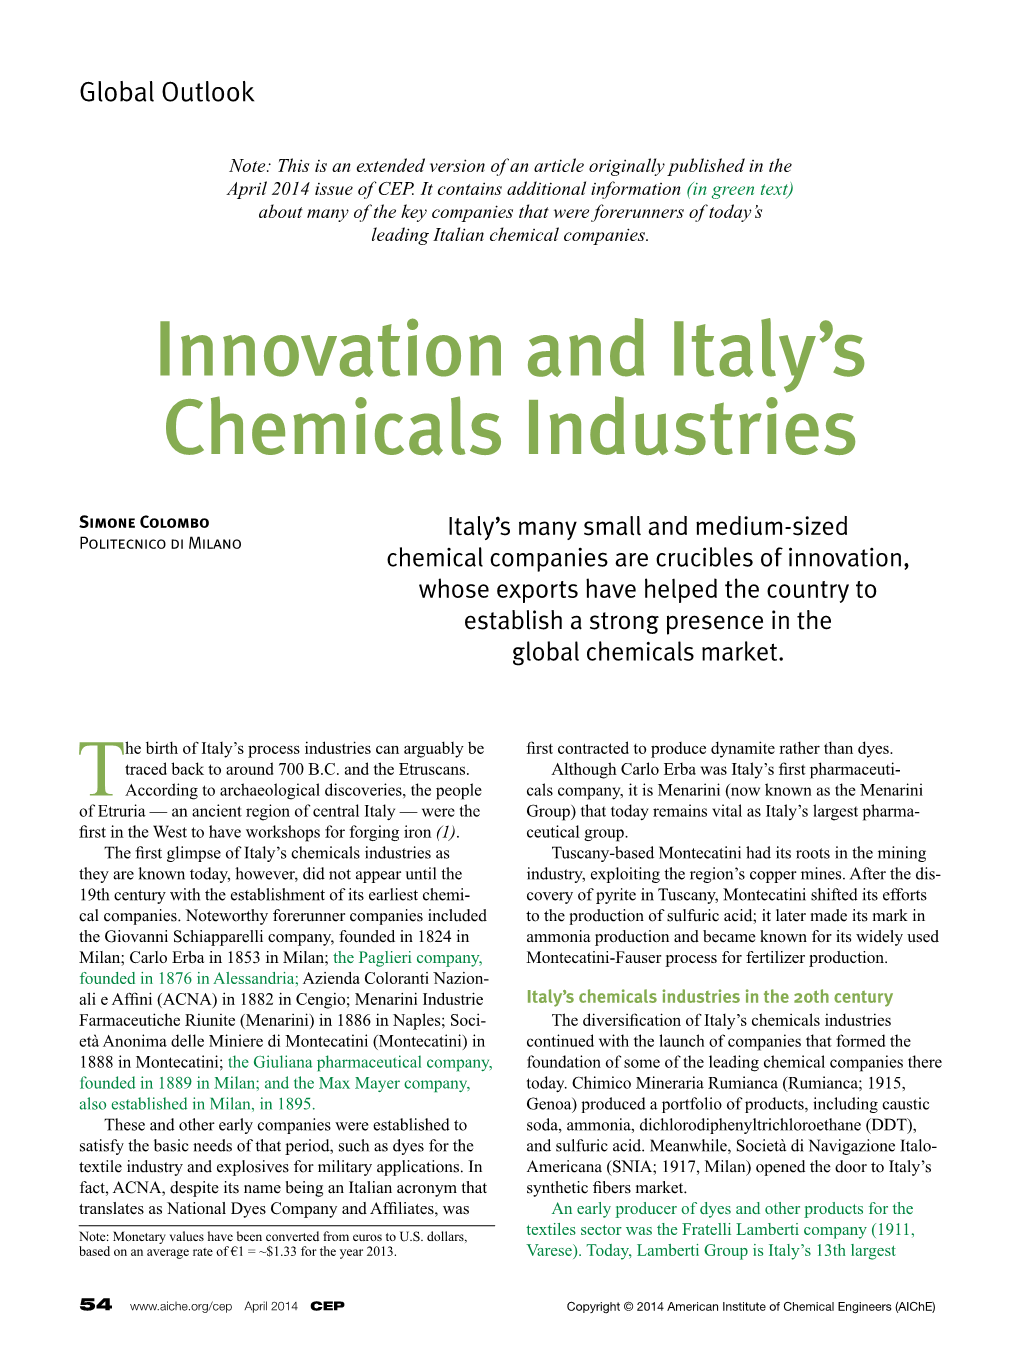 Innovation and Italy's Chemicals Industries